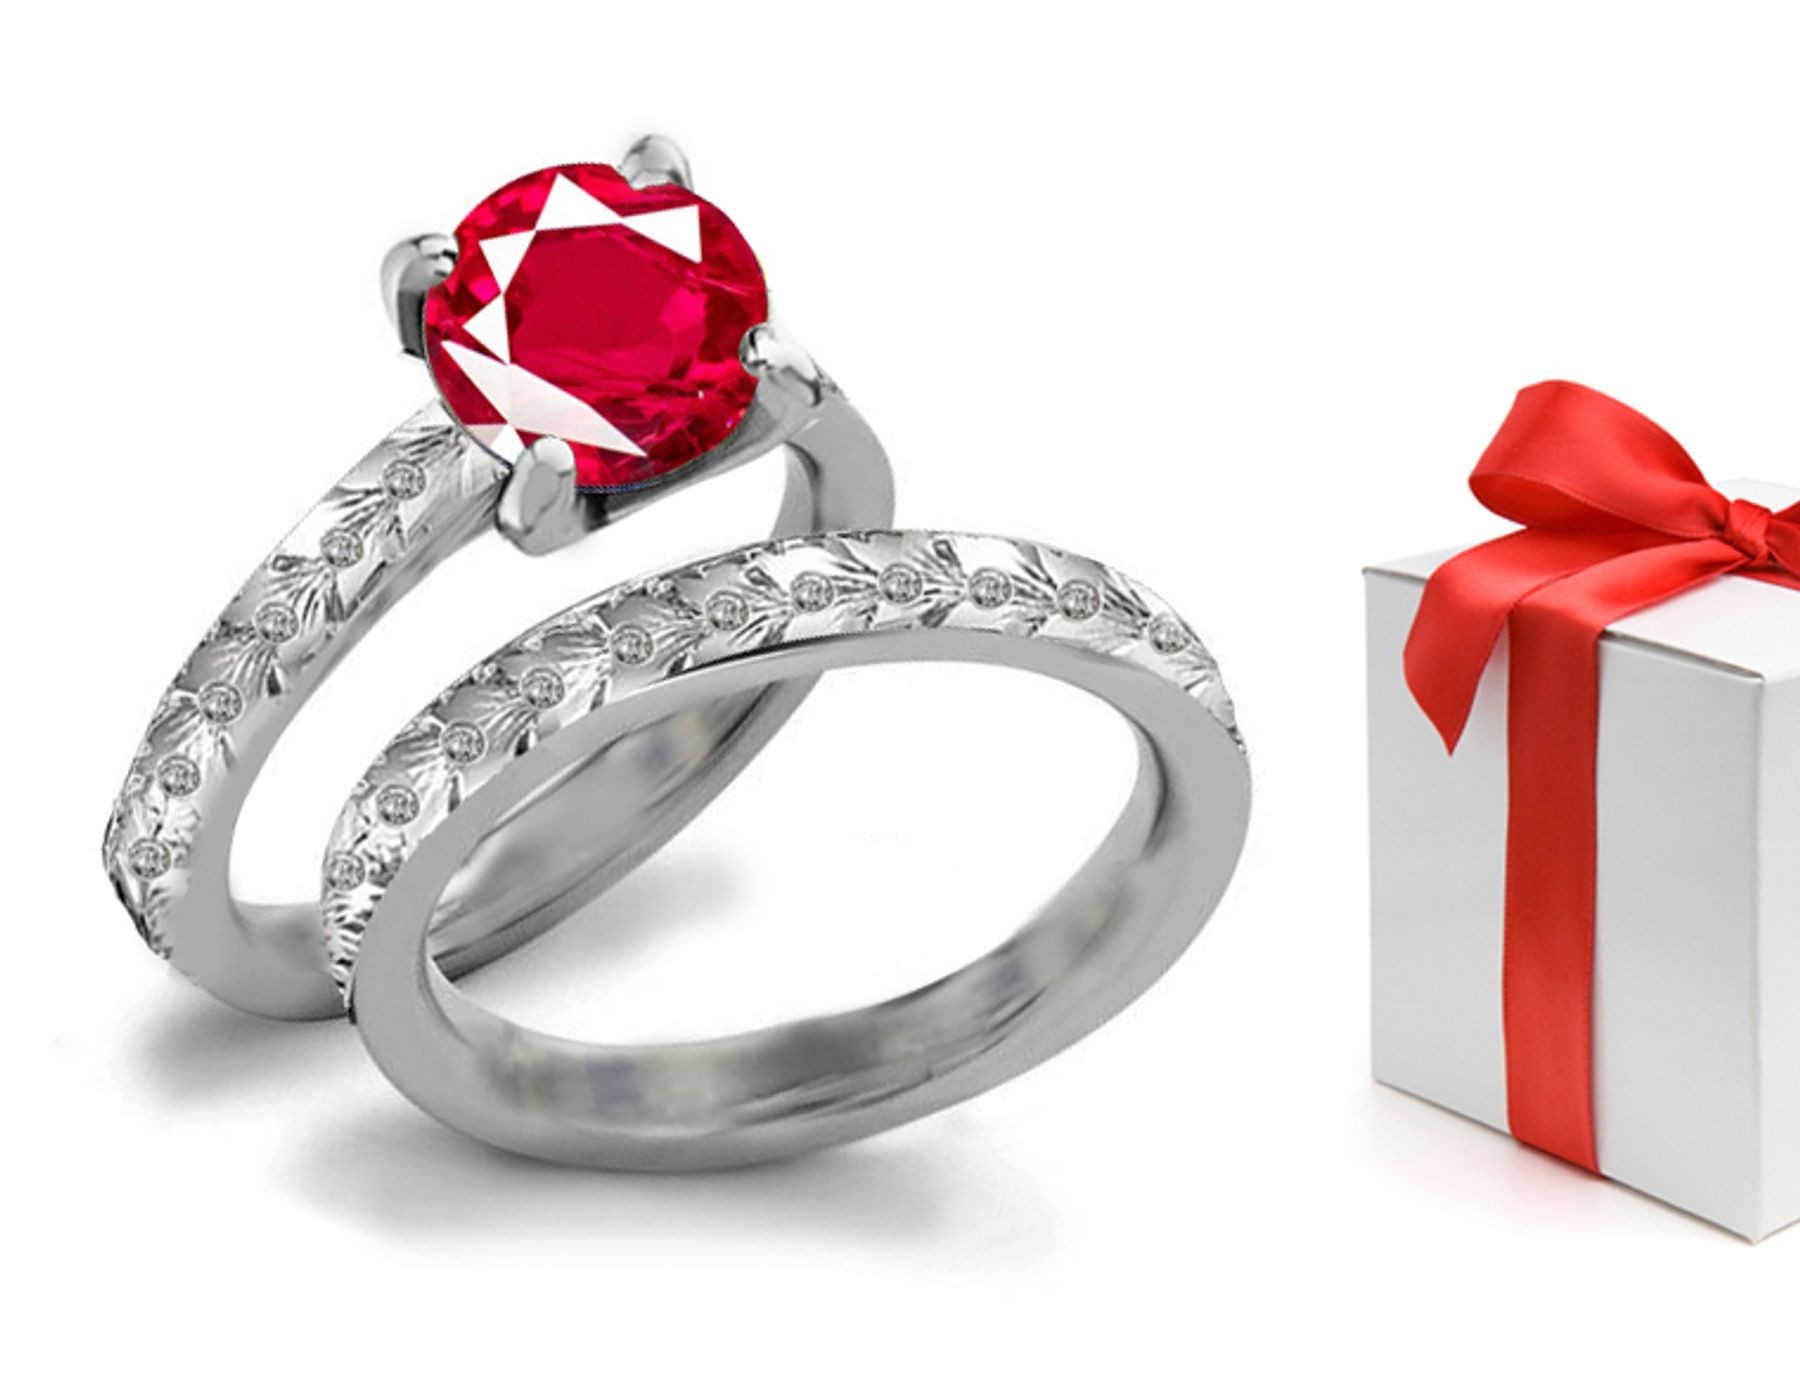 Specially Designed: Cherry Red Ruby & Diamond Blossom Foliate Motif Cluster Ring & Wedding in White Gold, & Sterling Silver, Platinum